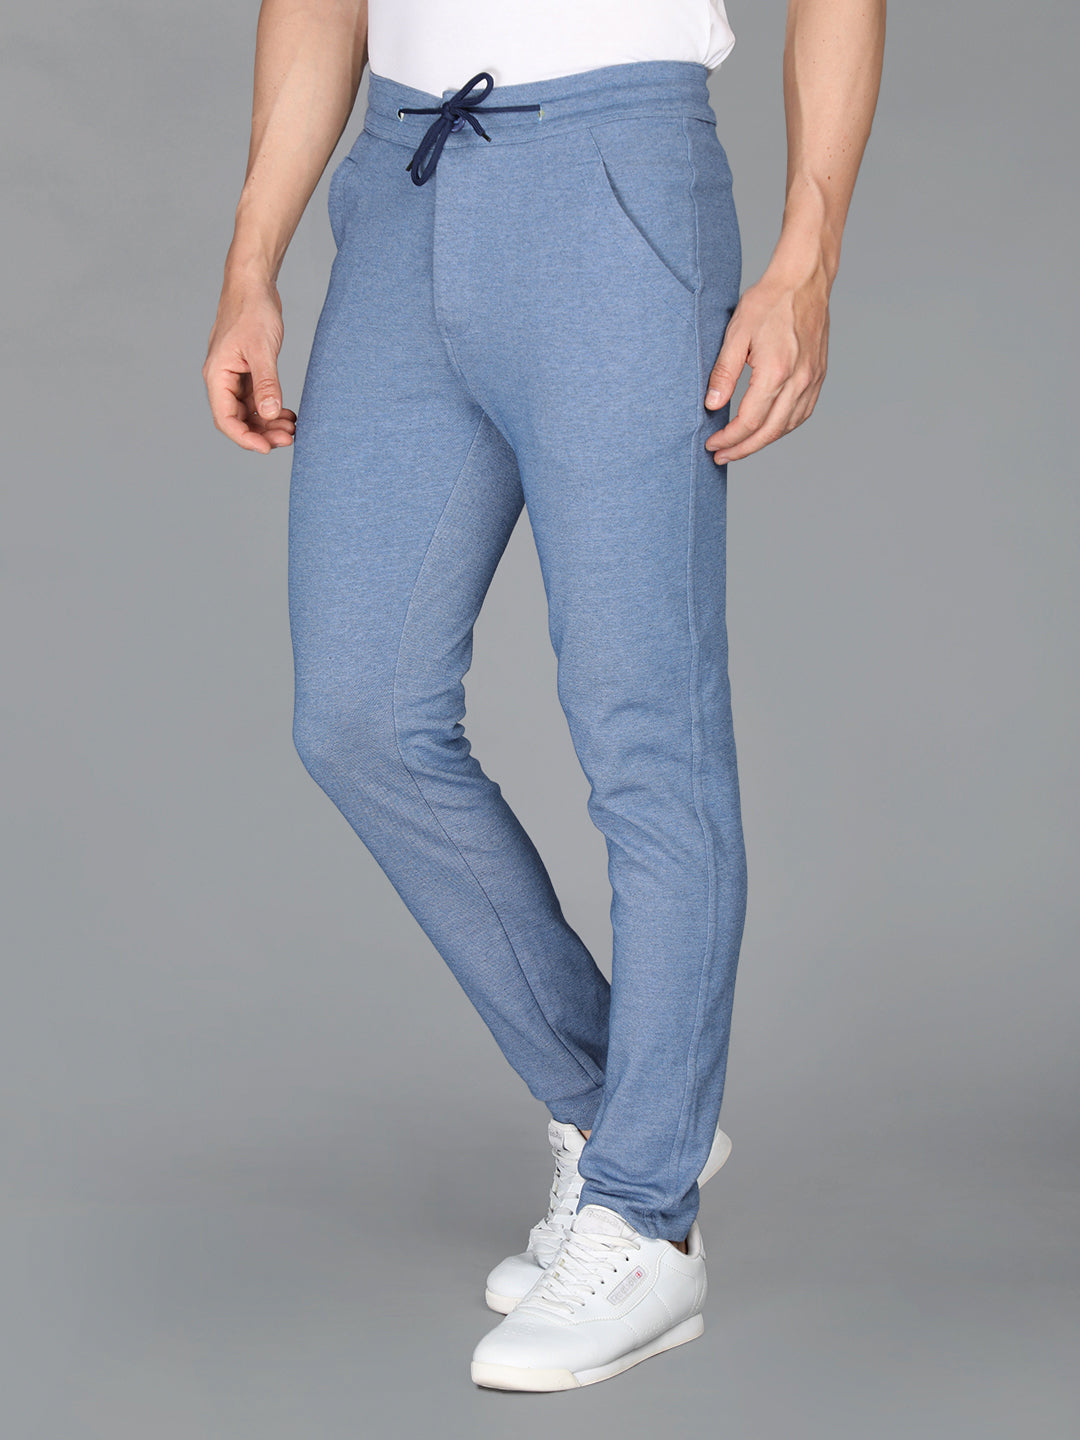 Denim By Vanquish & Fragment - Sweat Pants | HBX - Globally Curated Fashion  and Lifestyle by Hypebeast